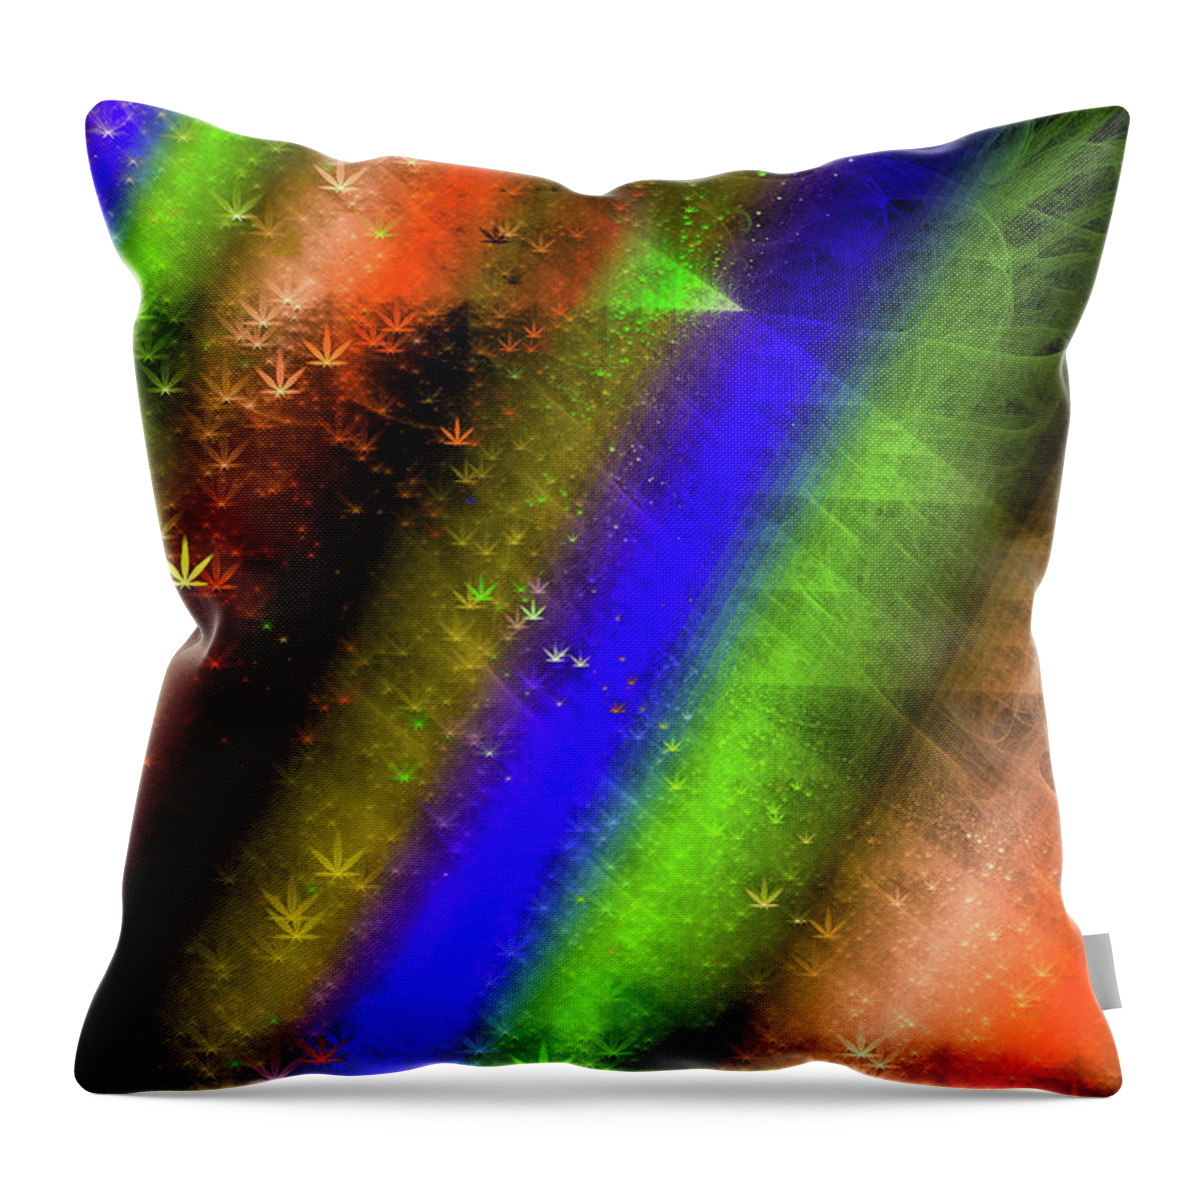 Weed Art Throw Pillow featuring the digital art Colorful abstract Weed Art by Matthias Hauser